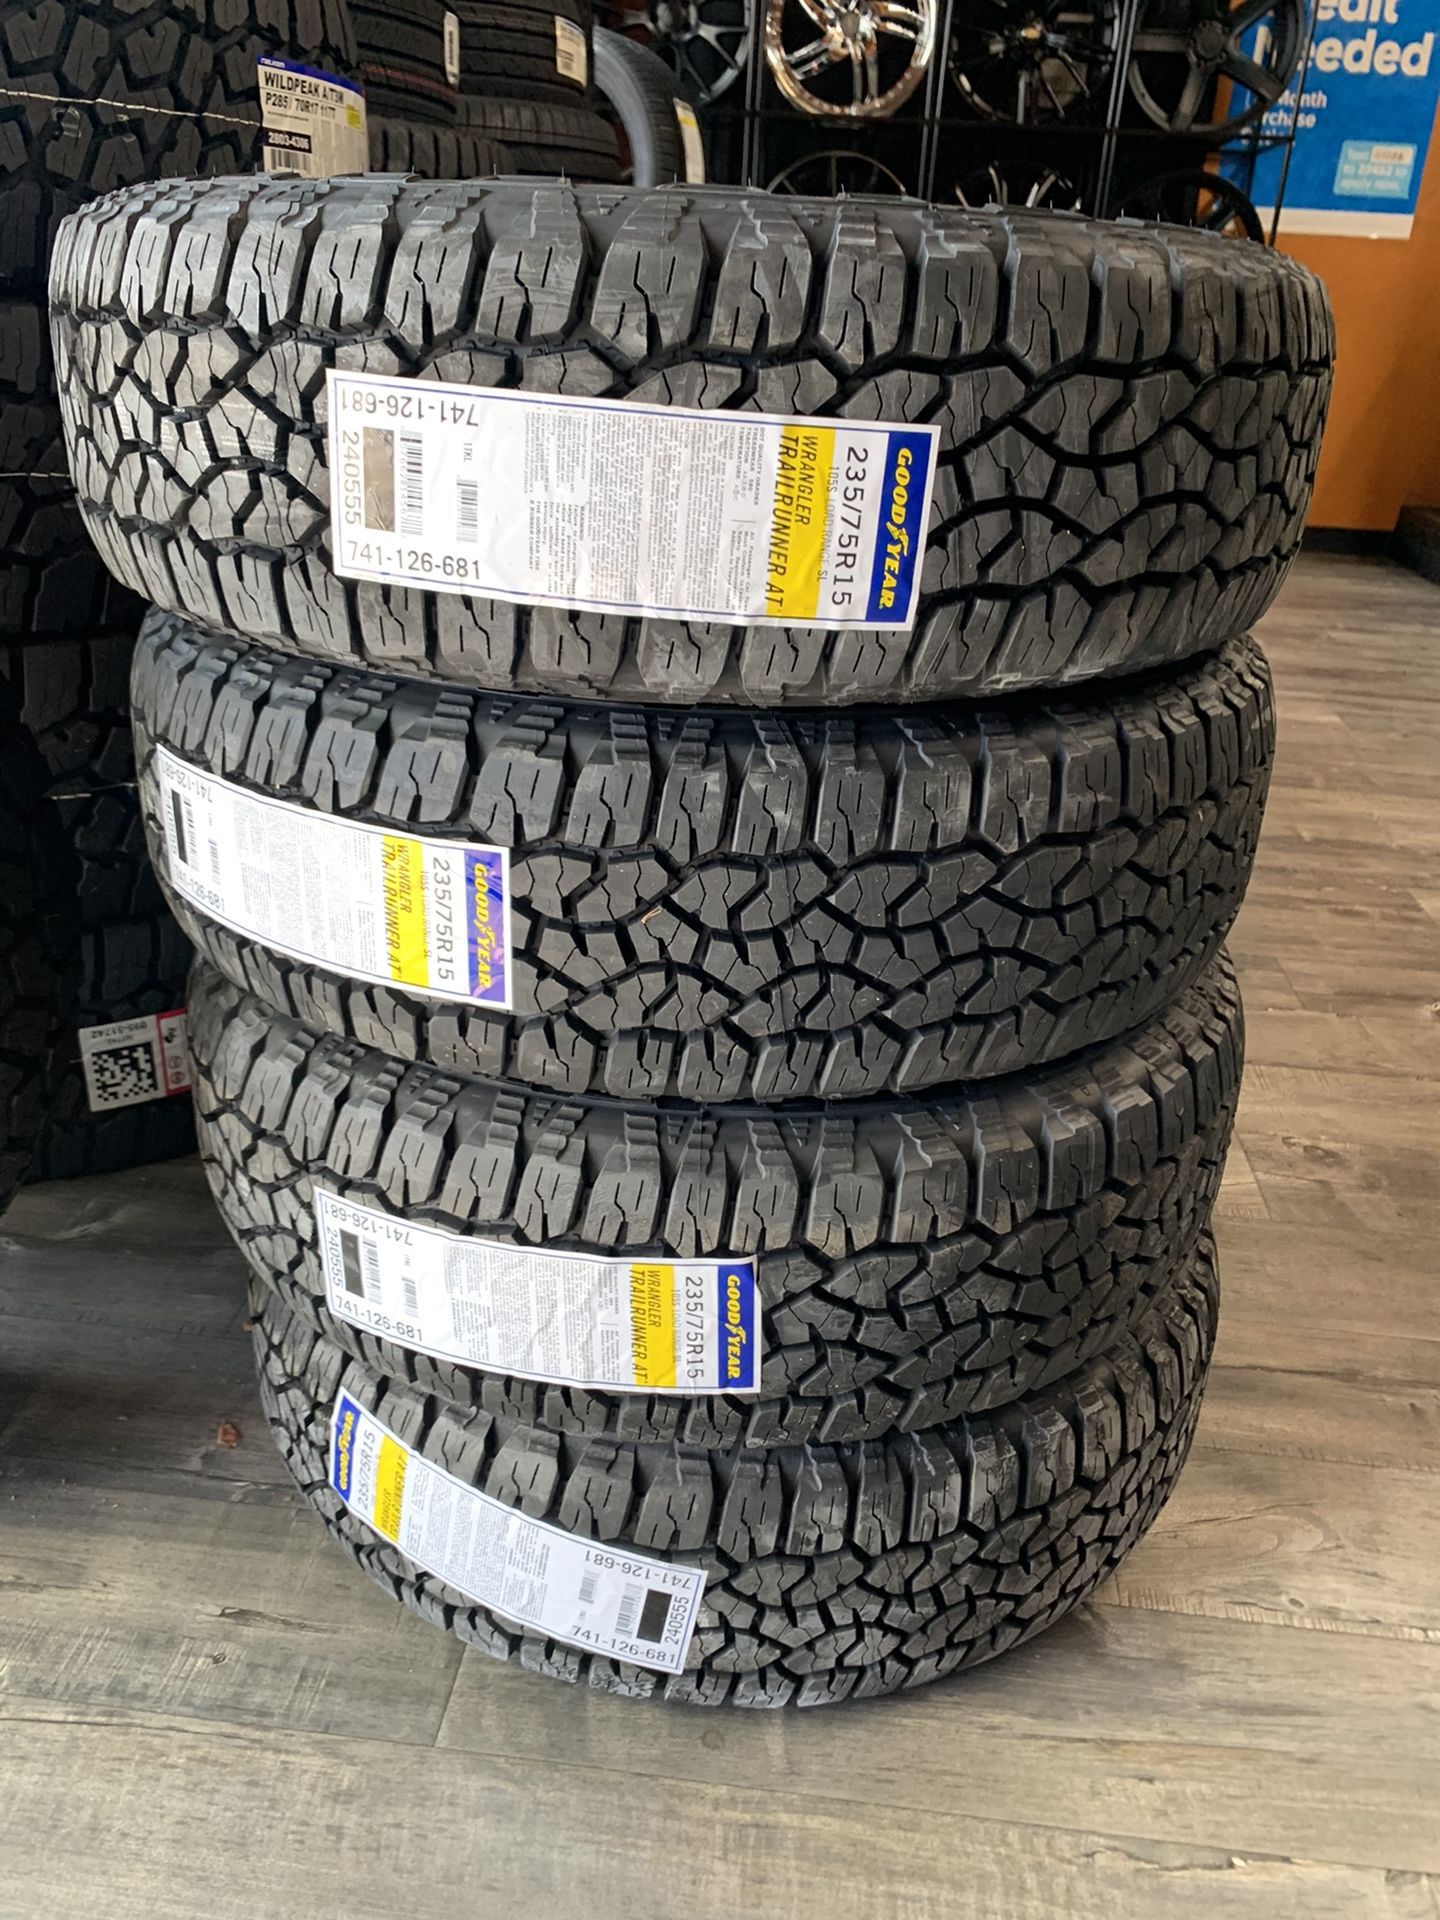 New Tire 235/75R15 Goodyear Wrangler TrailRunner A/T 105S Set Of 4 Tires We  Finance 50 Down 235/75/15 llantas for Sale in San Jose, CA - OfferUp